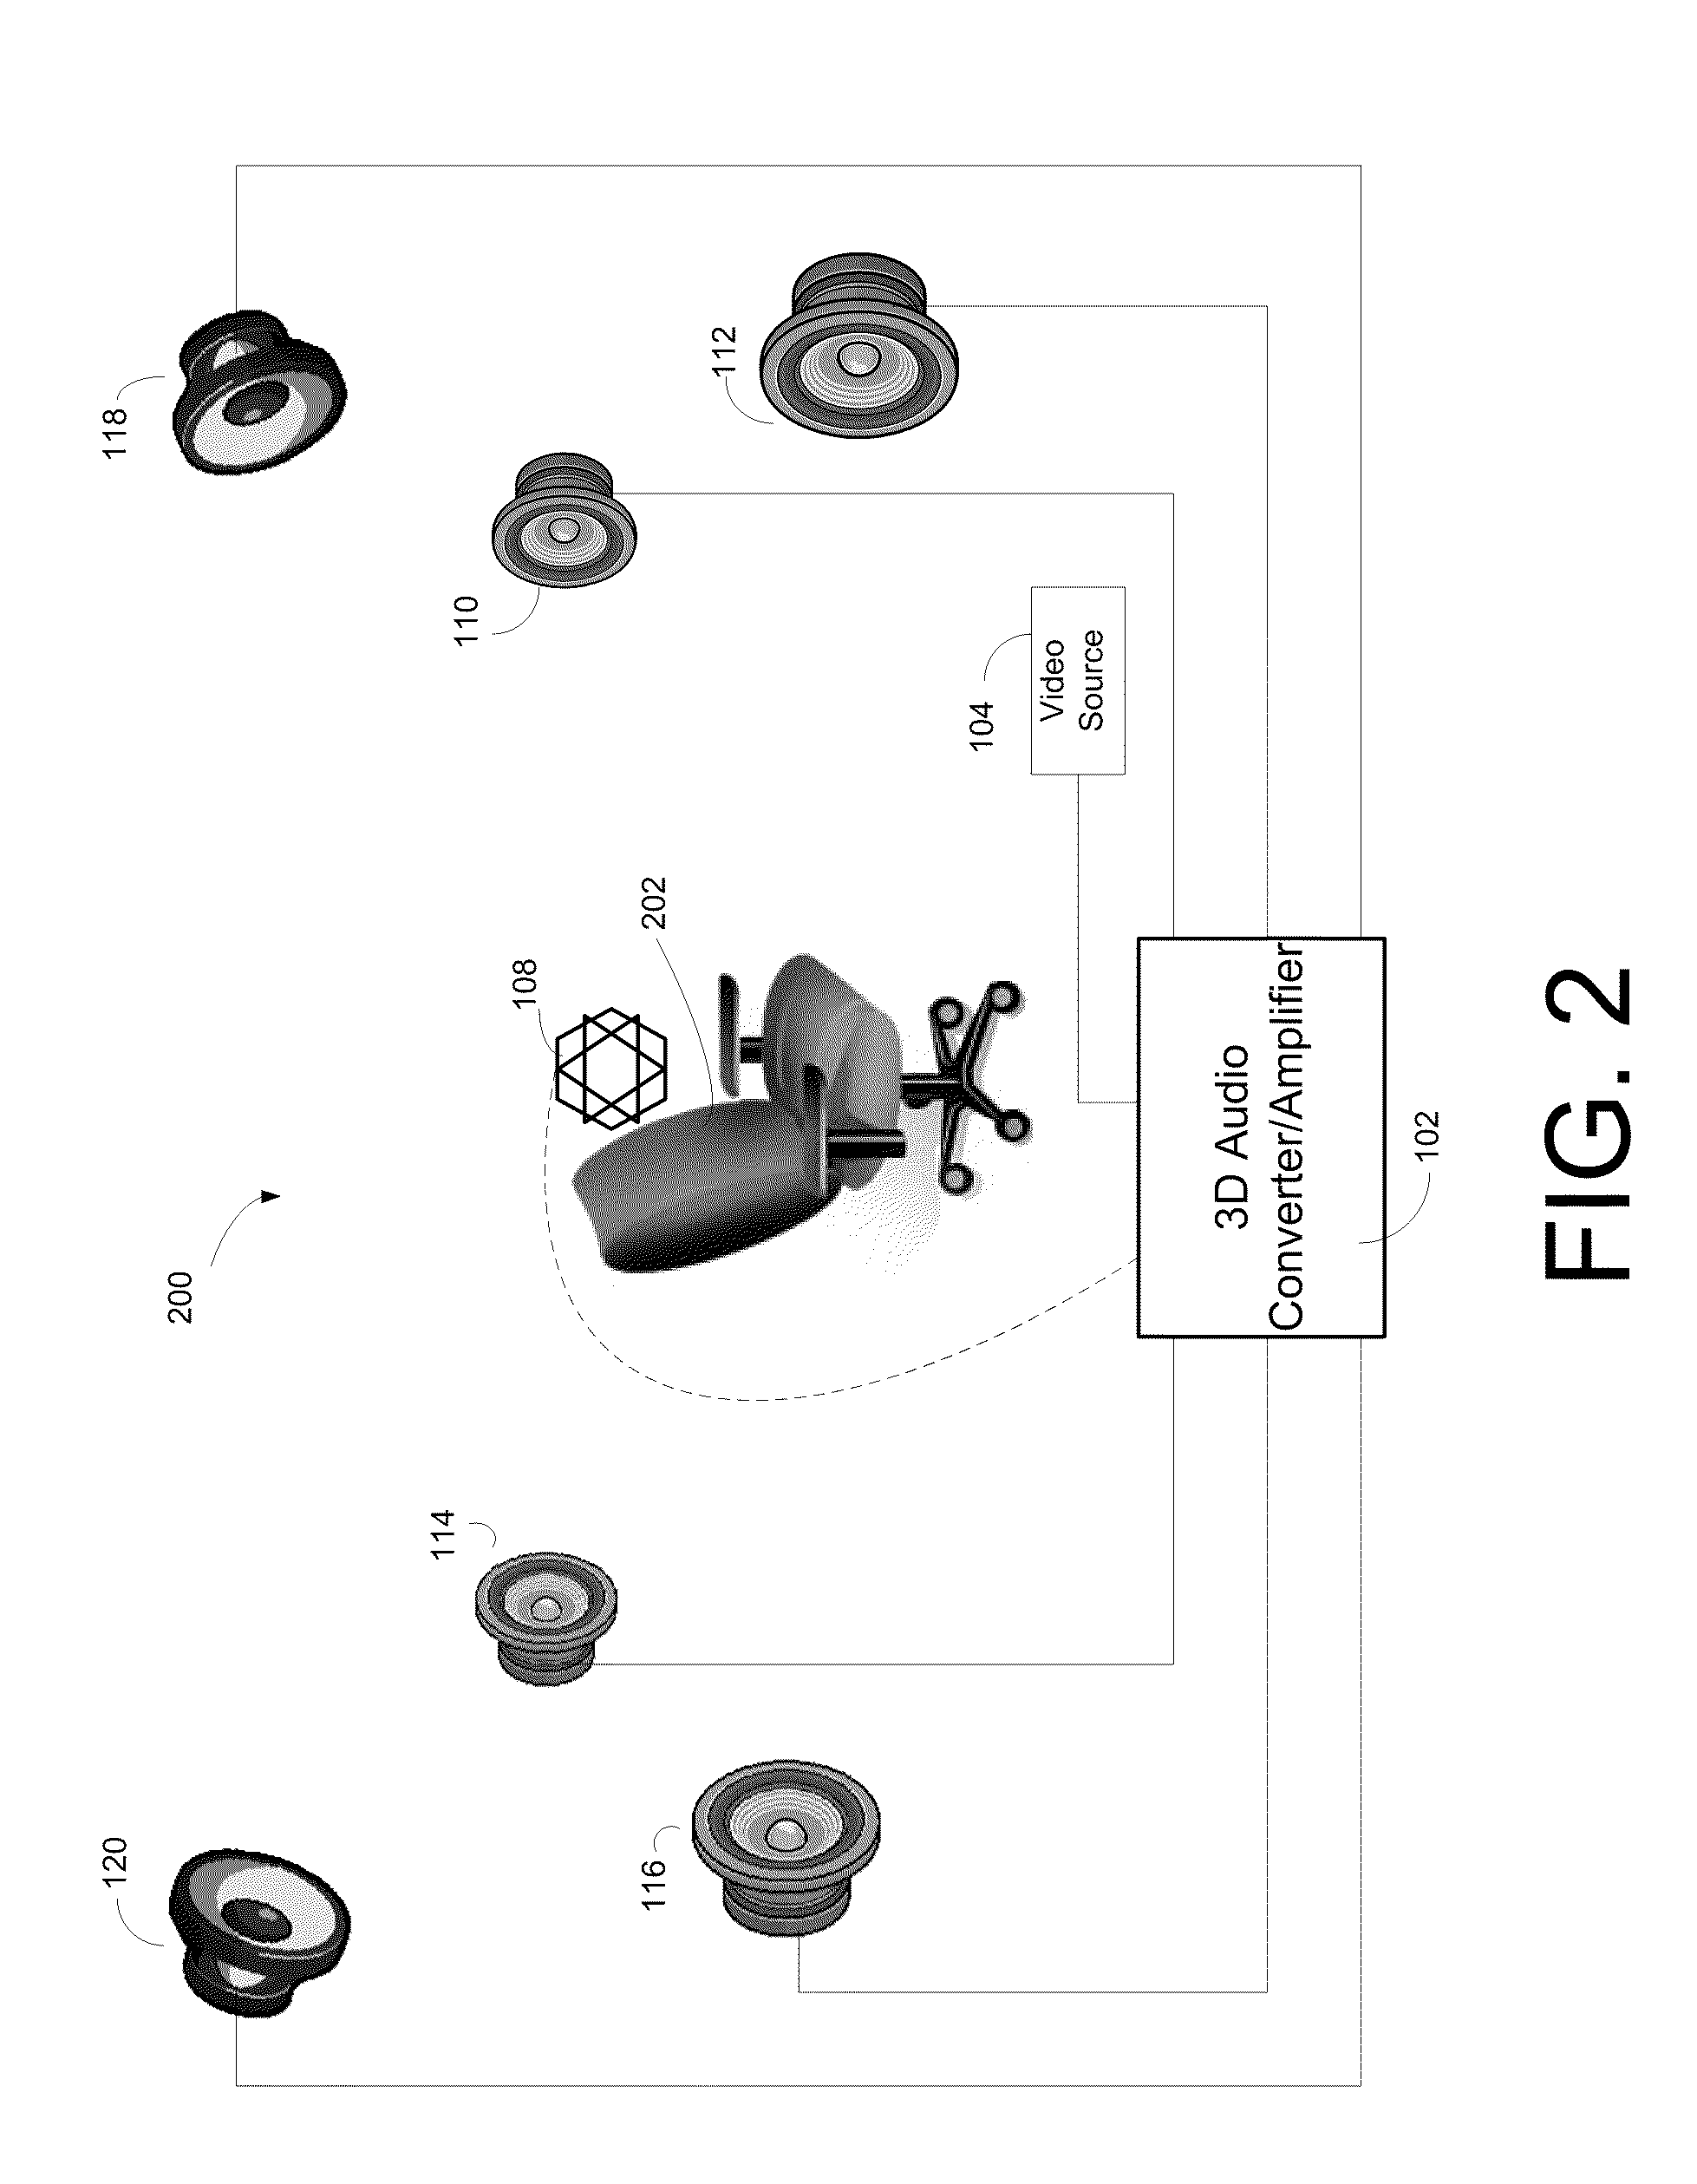 Systems, methods, and apparatus for controlling sounds in a three-dimensional listening environment